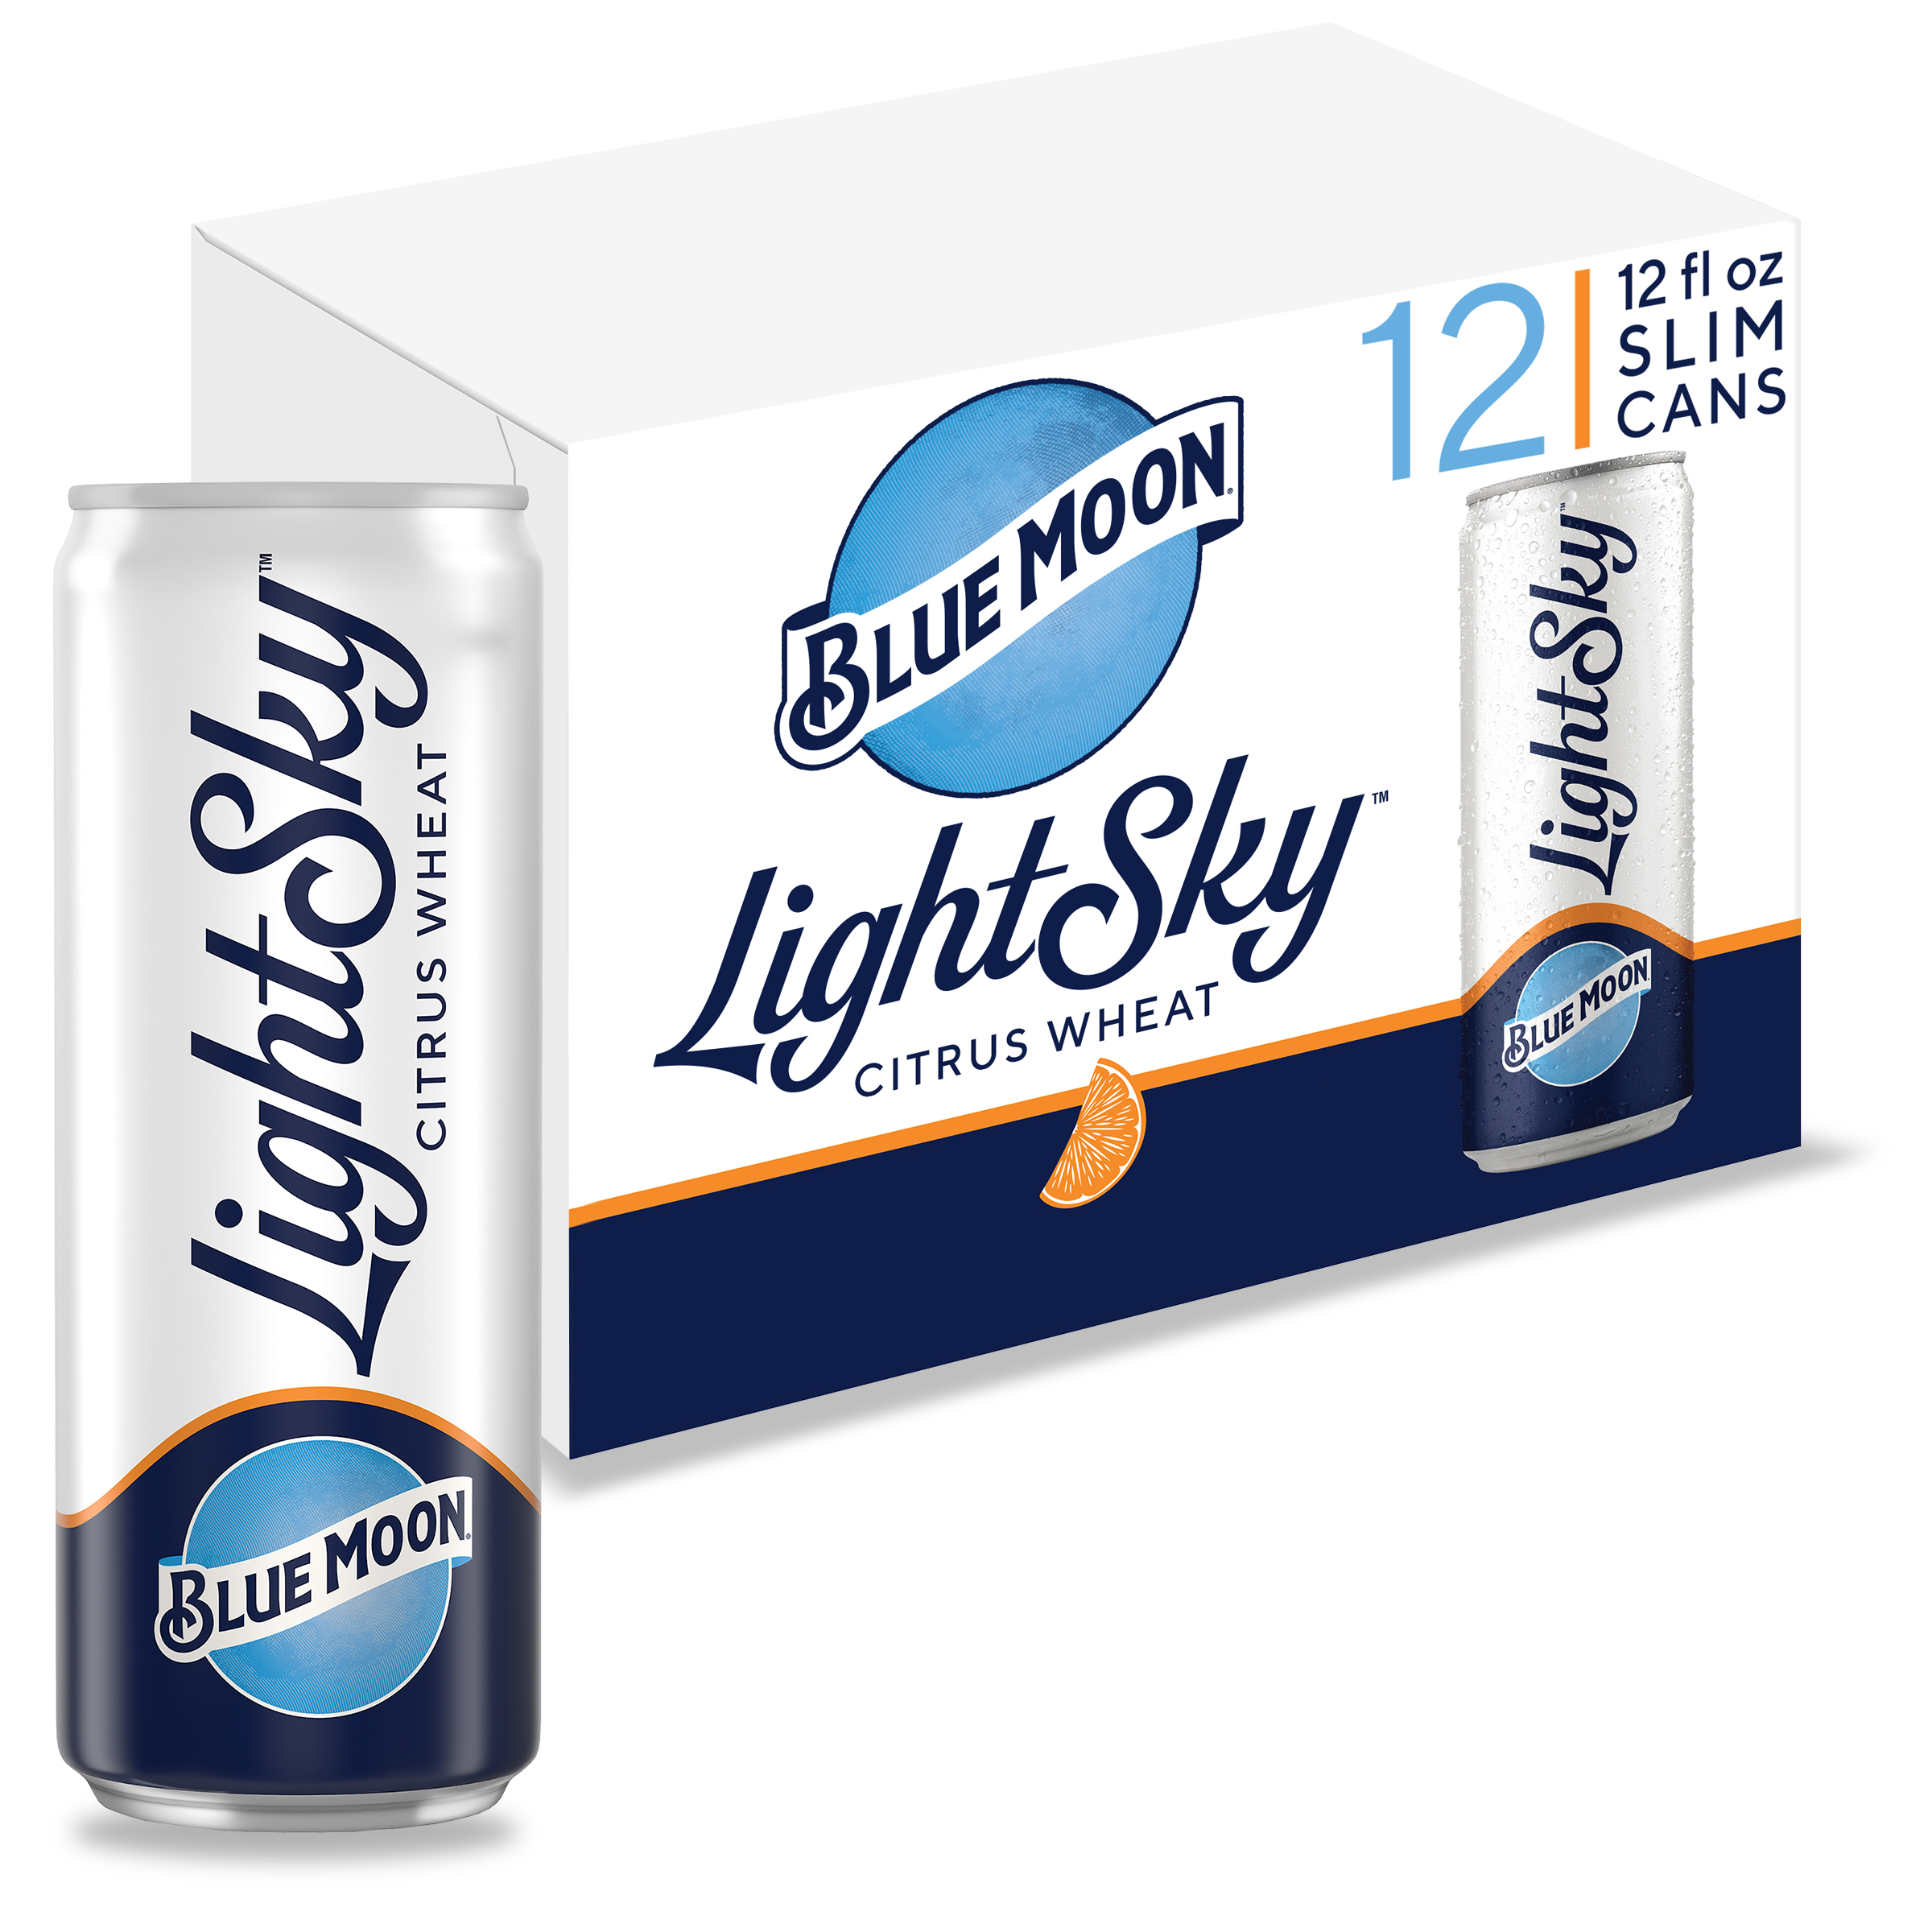 FREE BEER! (After Online Rebate) - One 12-pack of Blue Moon LightSky (Up to $20), Valid 1/27/2021 - 2/19/2021 in 29 States